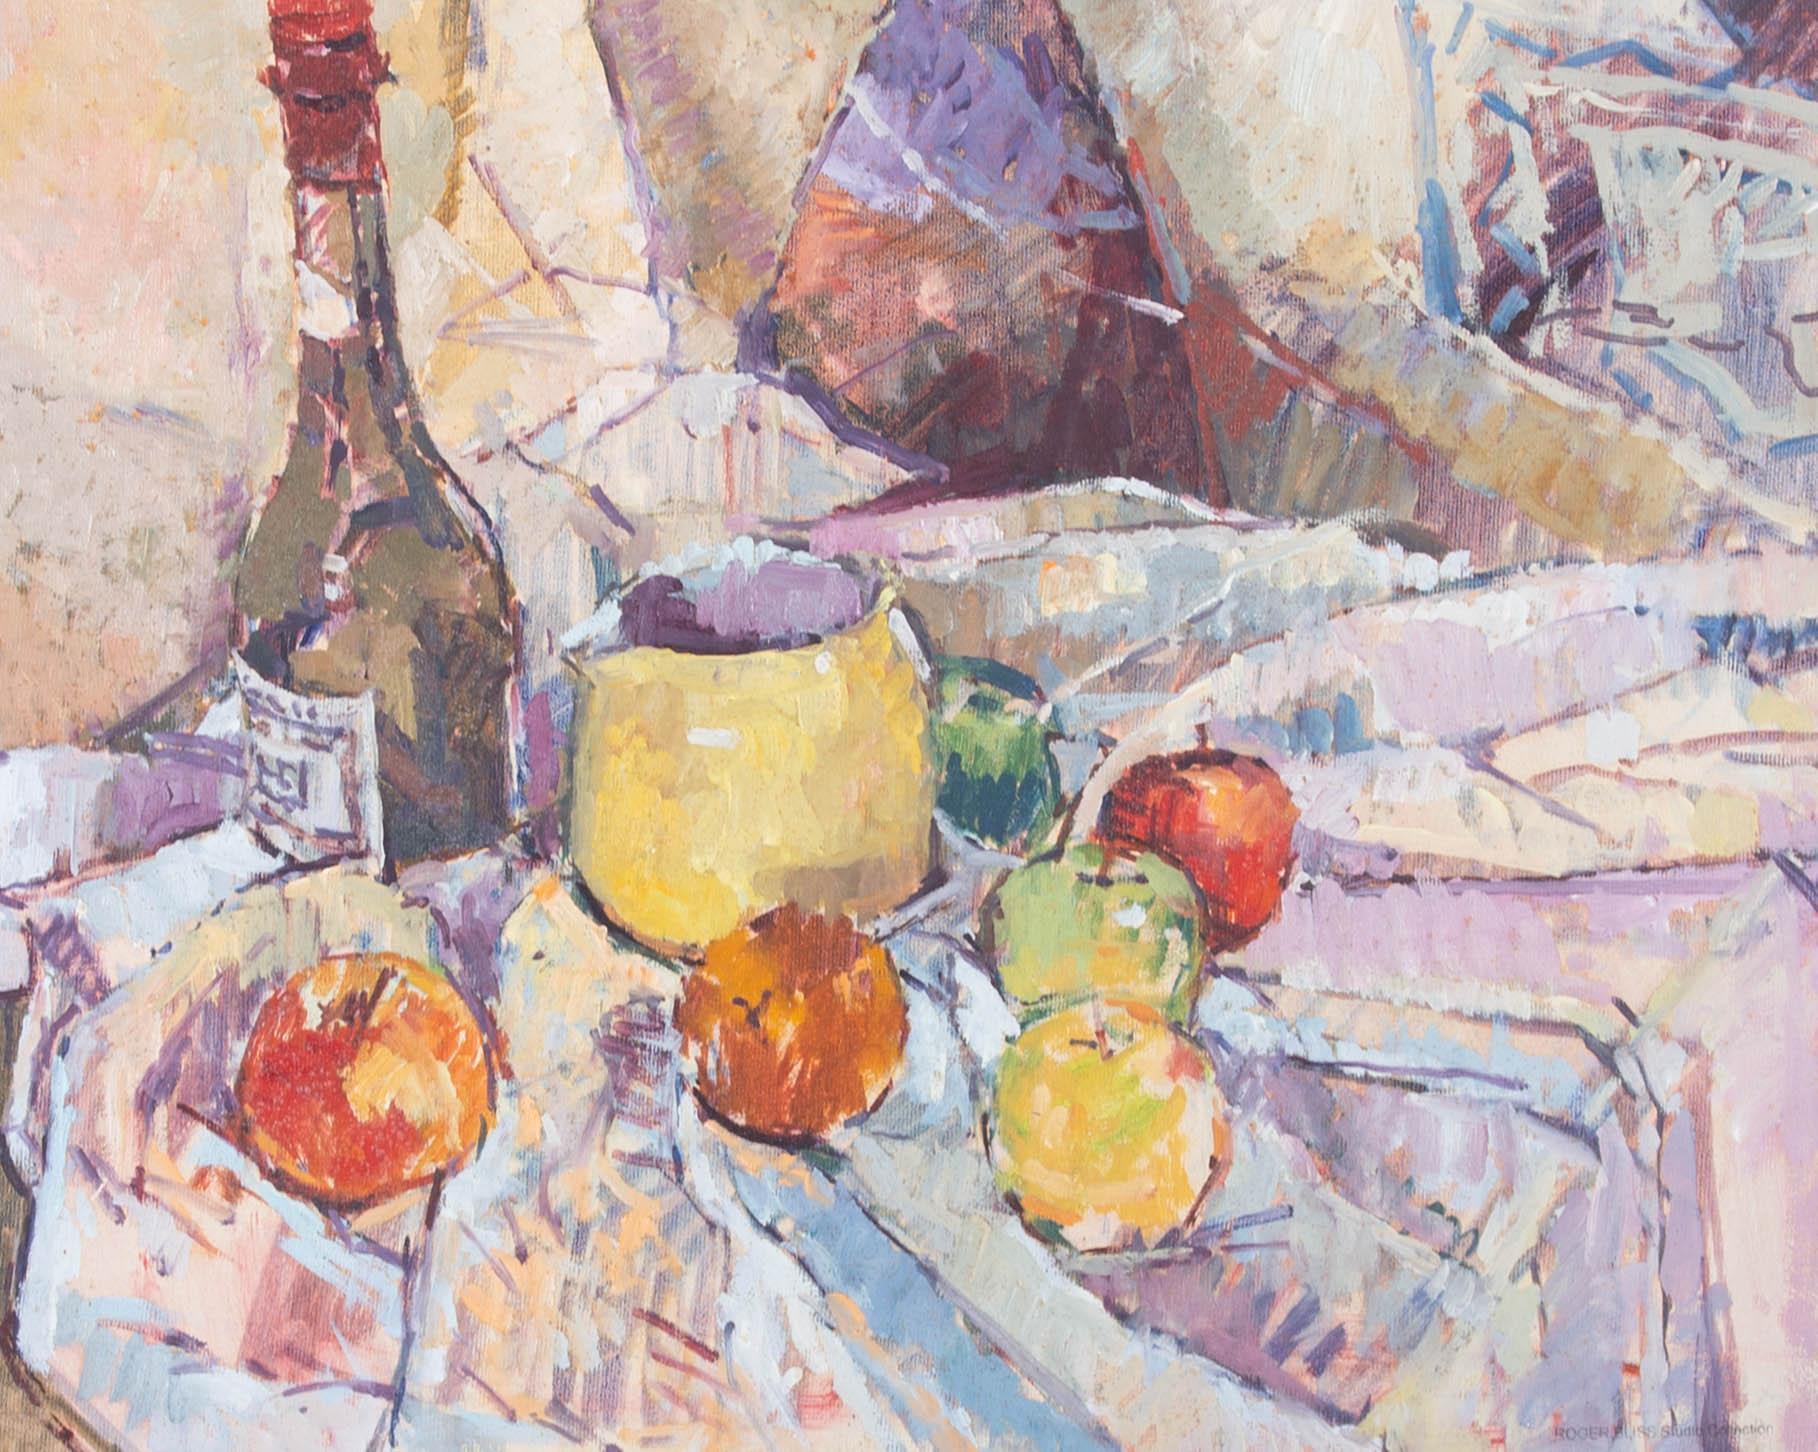 This dynamic painting incorporates a neutral palette and expressive brushstrokes to create a fresh still life scene. In a masterful hand the artist has captured the intricate folds of the material under the objects, all while keeping a lose, relaxed